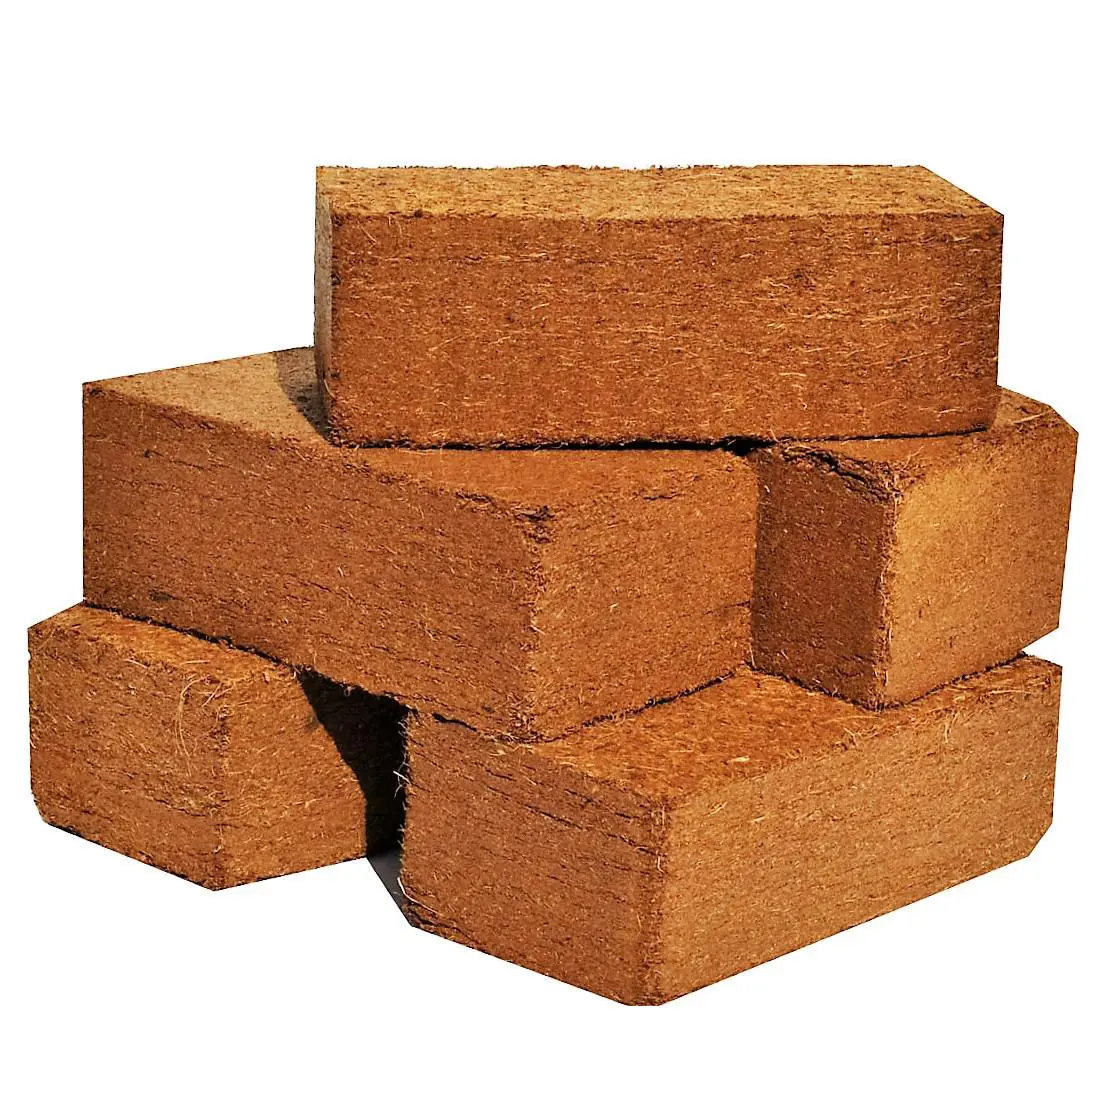 Cocopeat Coco Coir Coco Pith Brick / Block 5 kg High EC Indonesian Best Quality